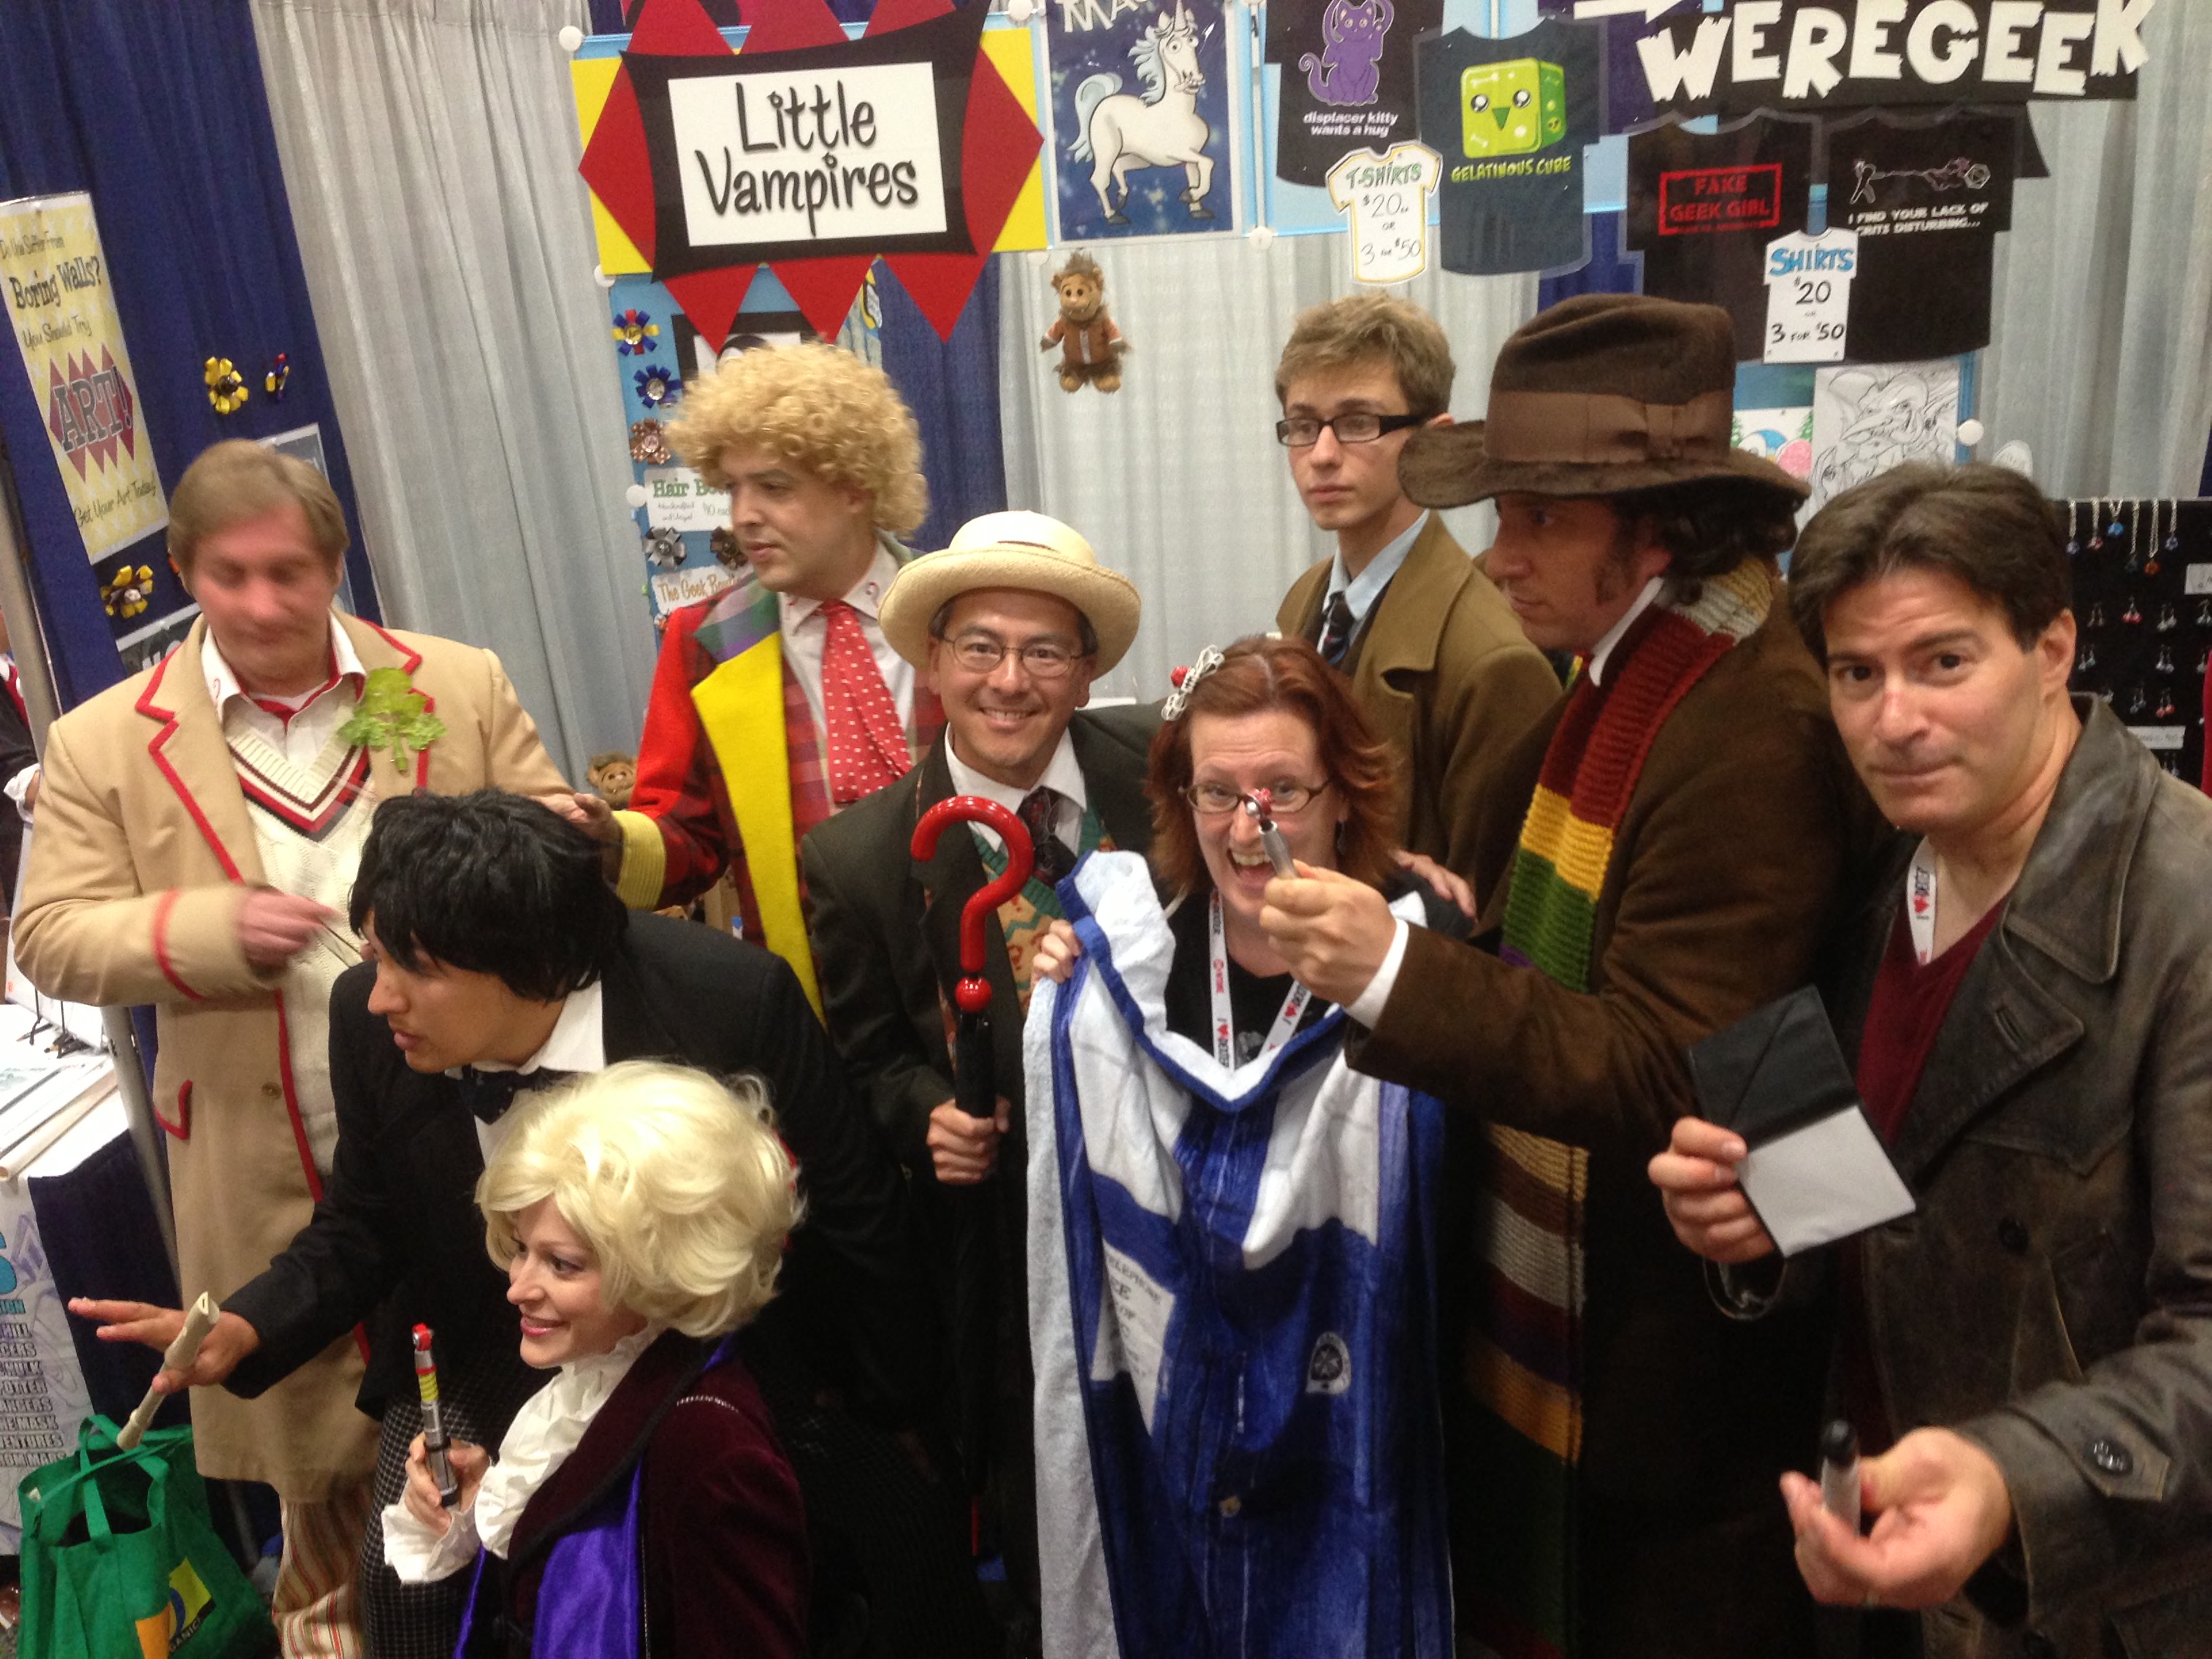 Rebecca Hicks posing with several Doctor Who cosplayers in front of the Little Vampures booth